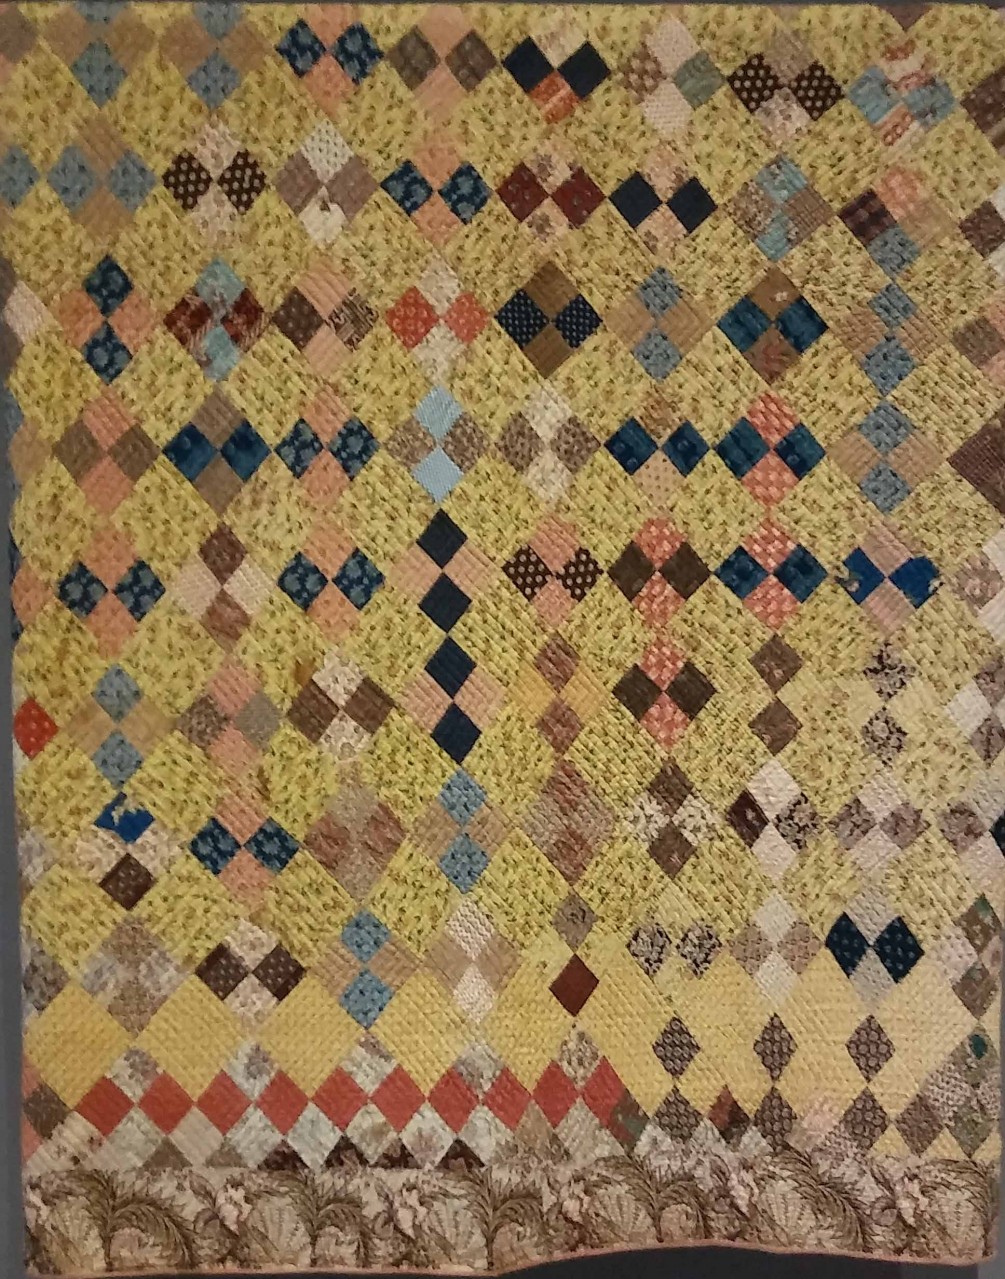 Antique Quilts for a Cause